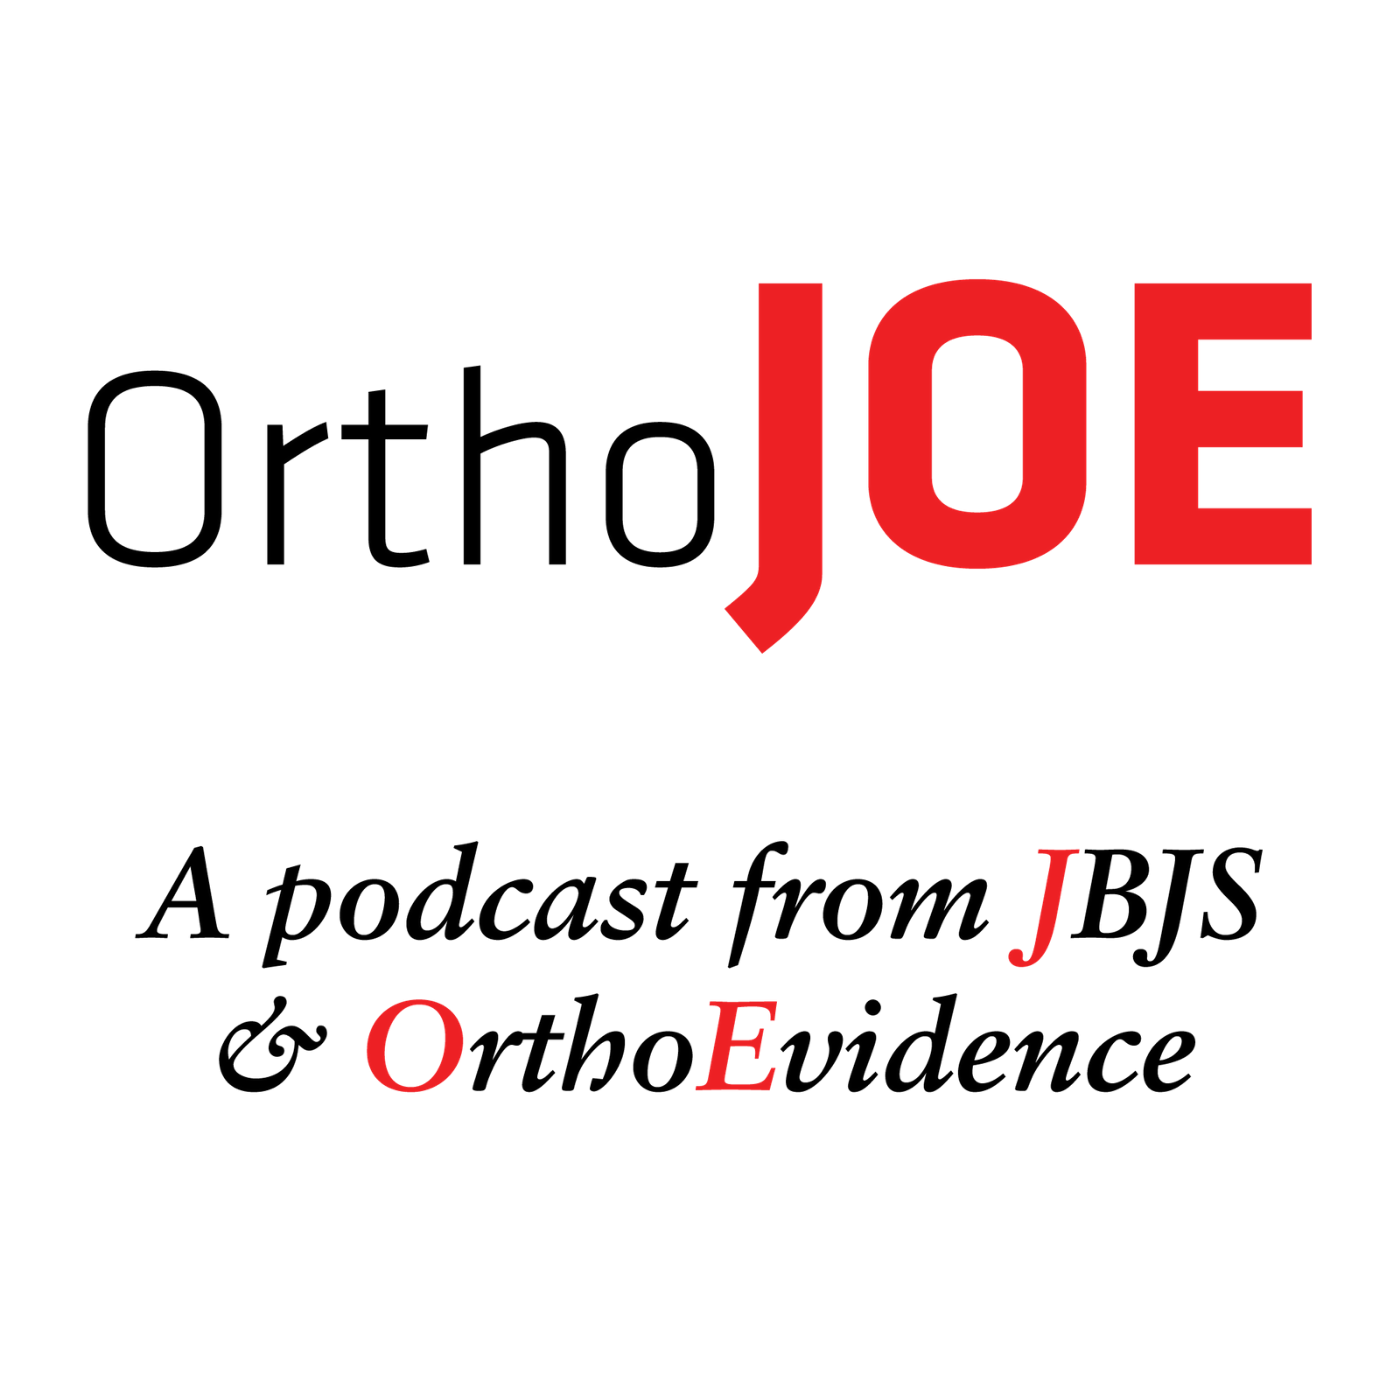 Women in Orthopaedics (with special guests Ann Van Heest and Laurie Hiemstra)